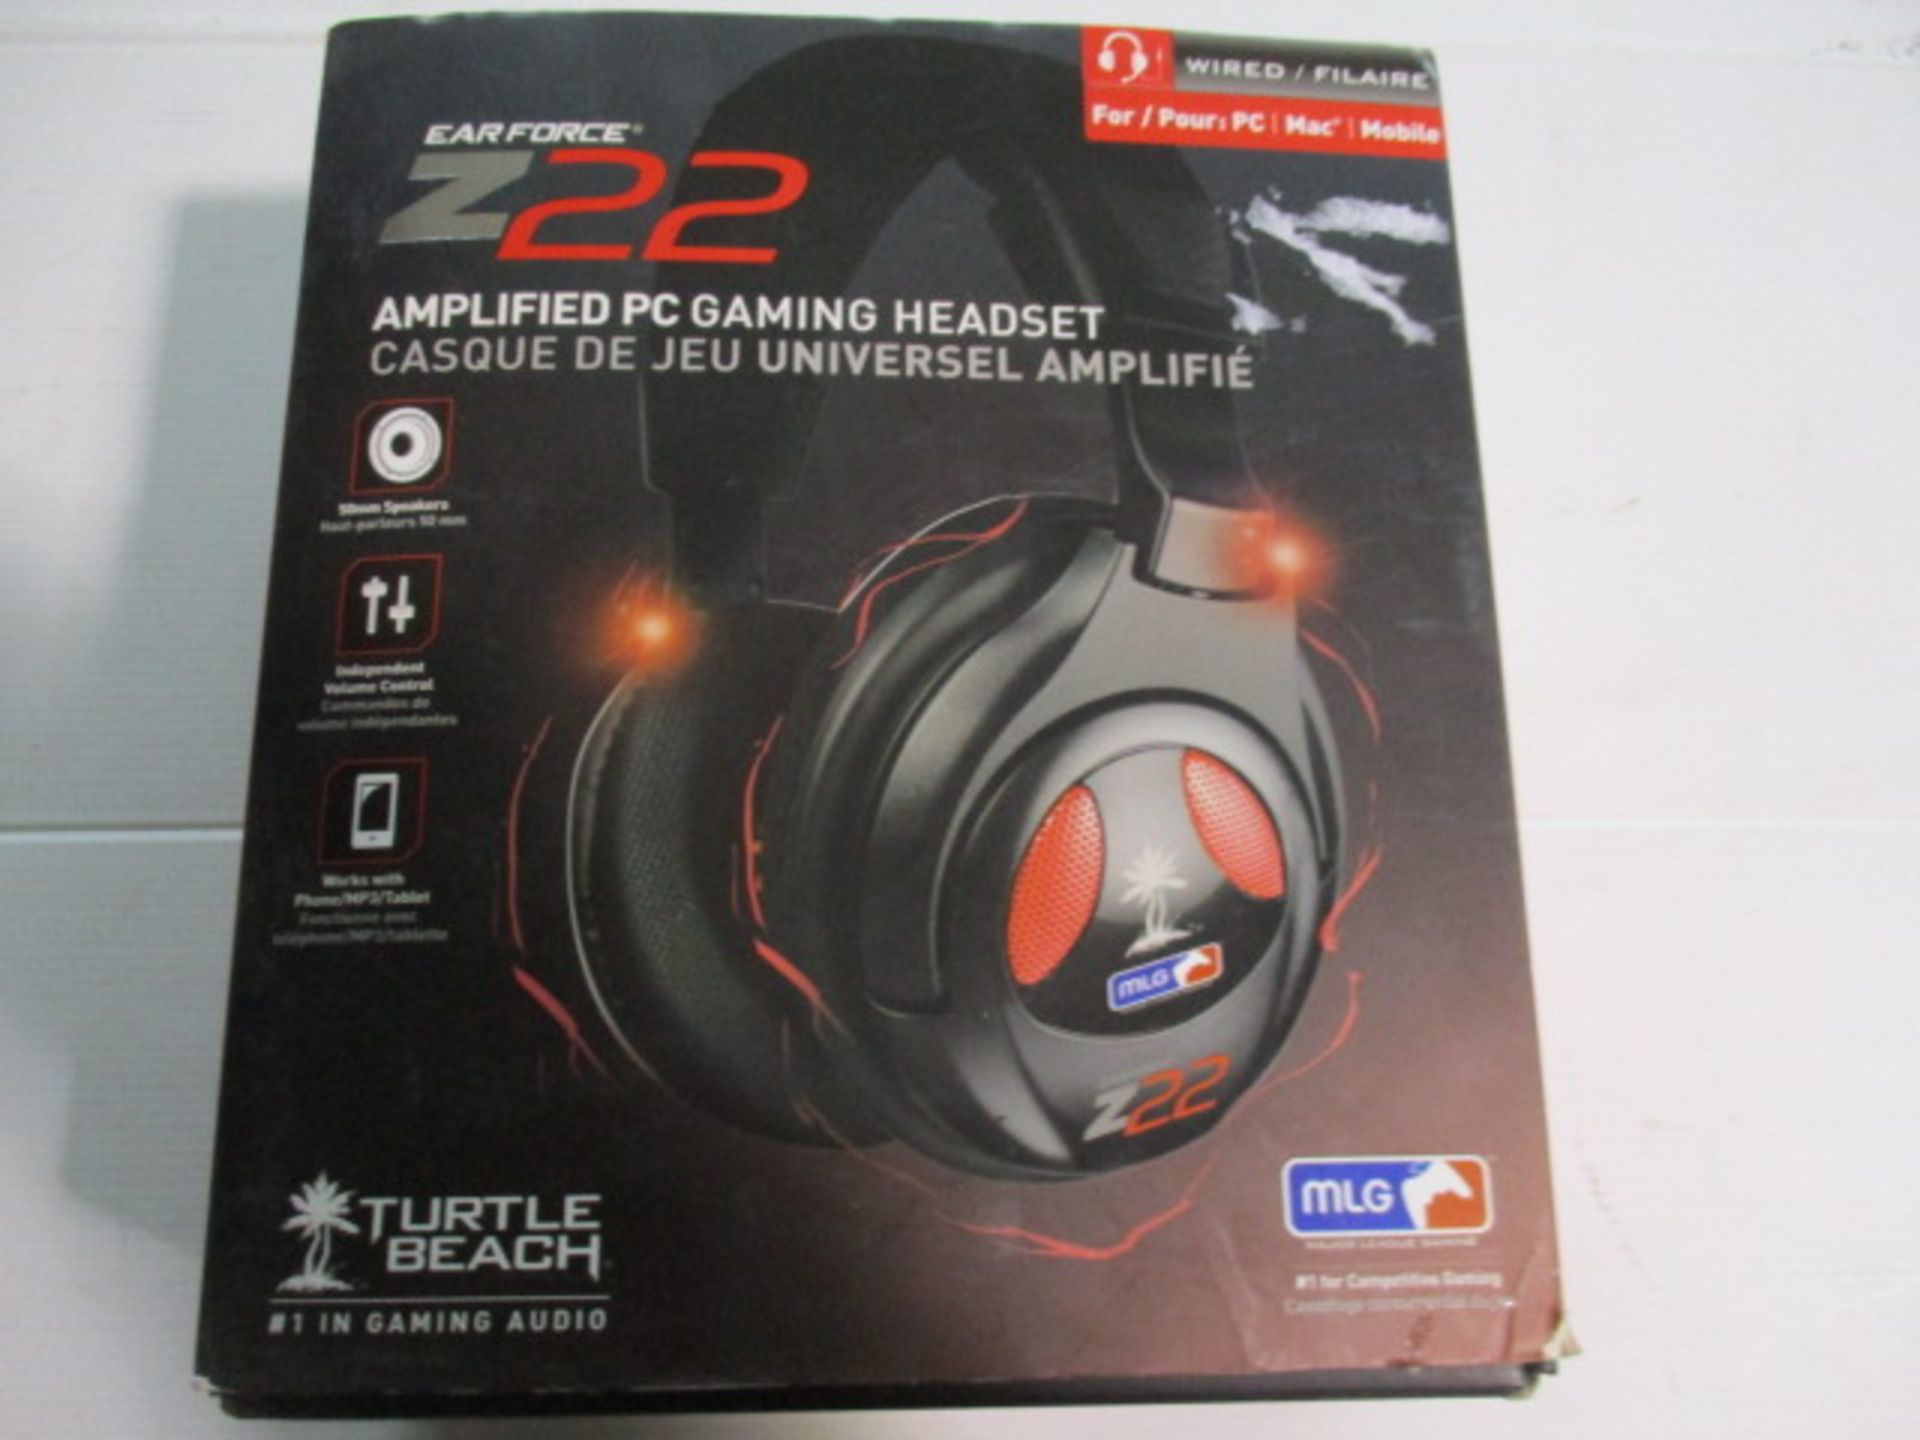 Turtle Beach EaeForce Z22 Gaming headset boxed and unchecked similar rrp £70 + - Image 2 of 3